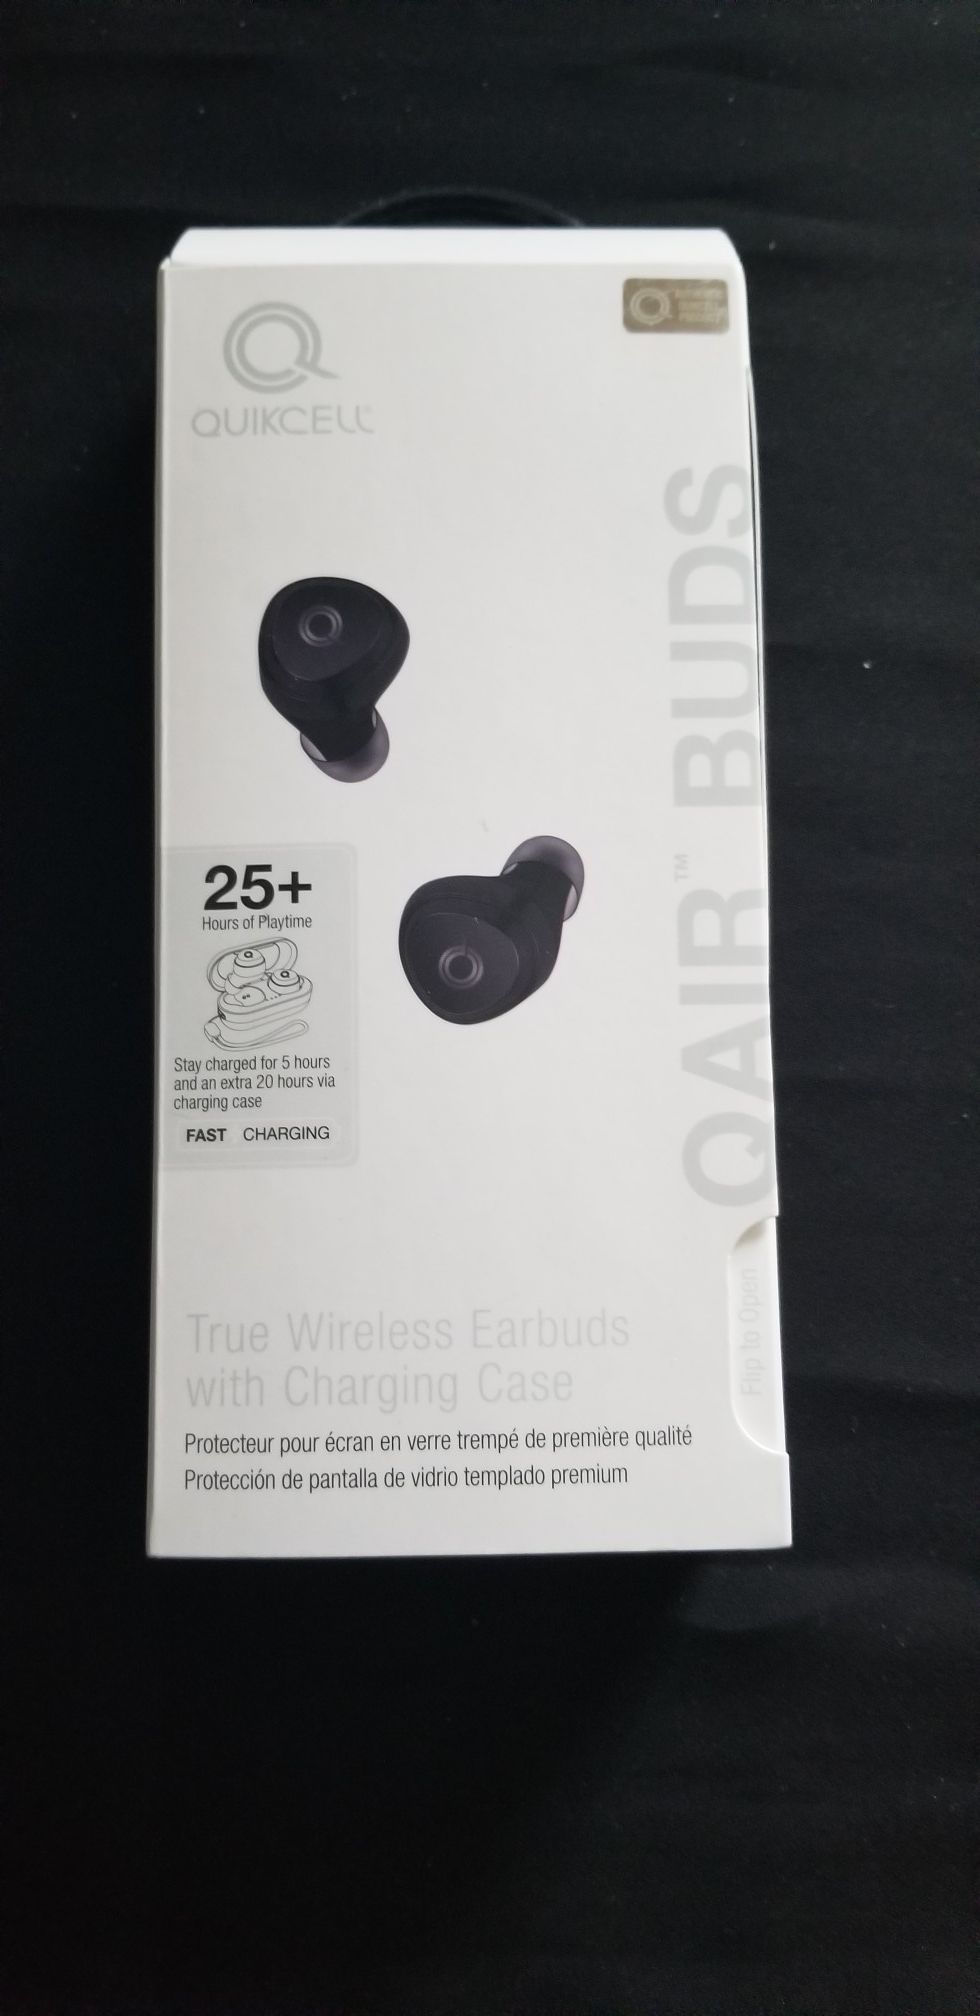 GREAT GIFT ~ Quikcell QAIR Buds True Wireless Earbuds with Charging Case